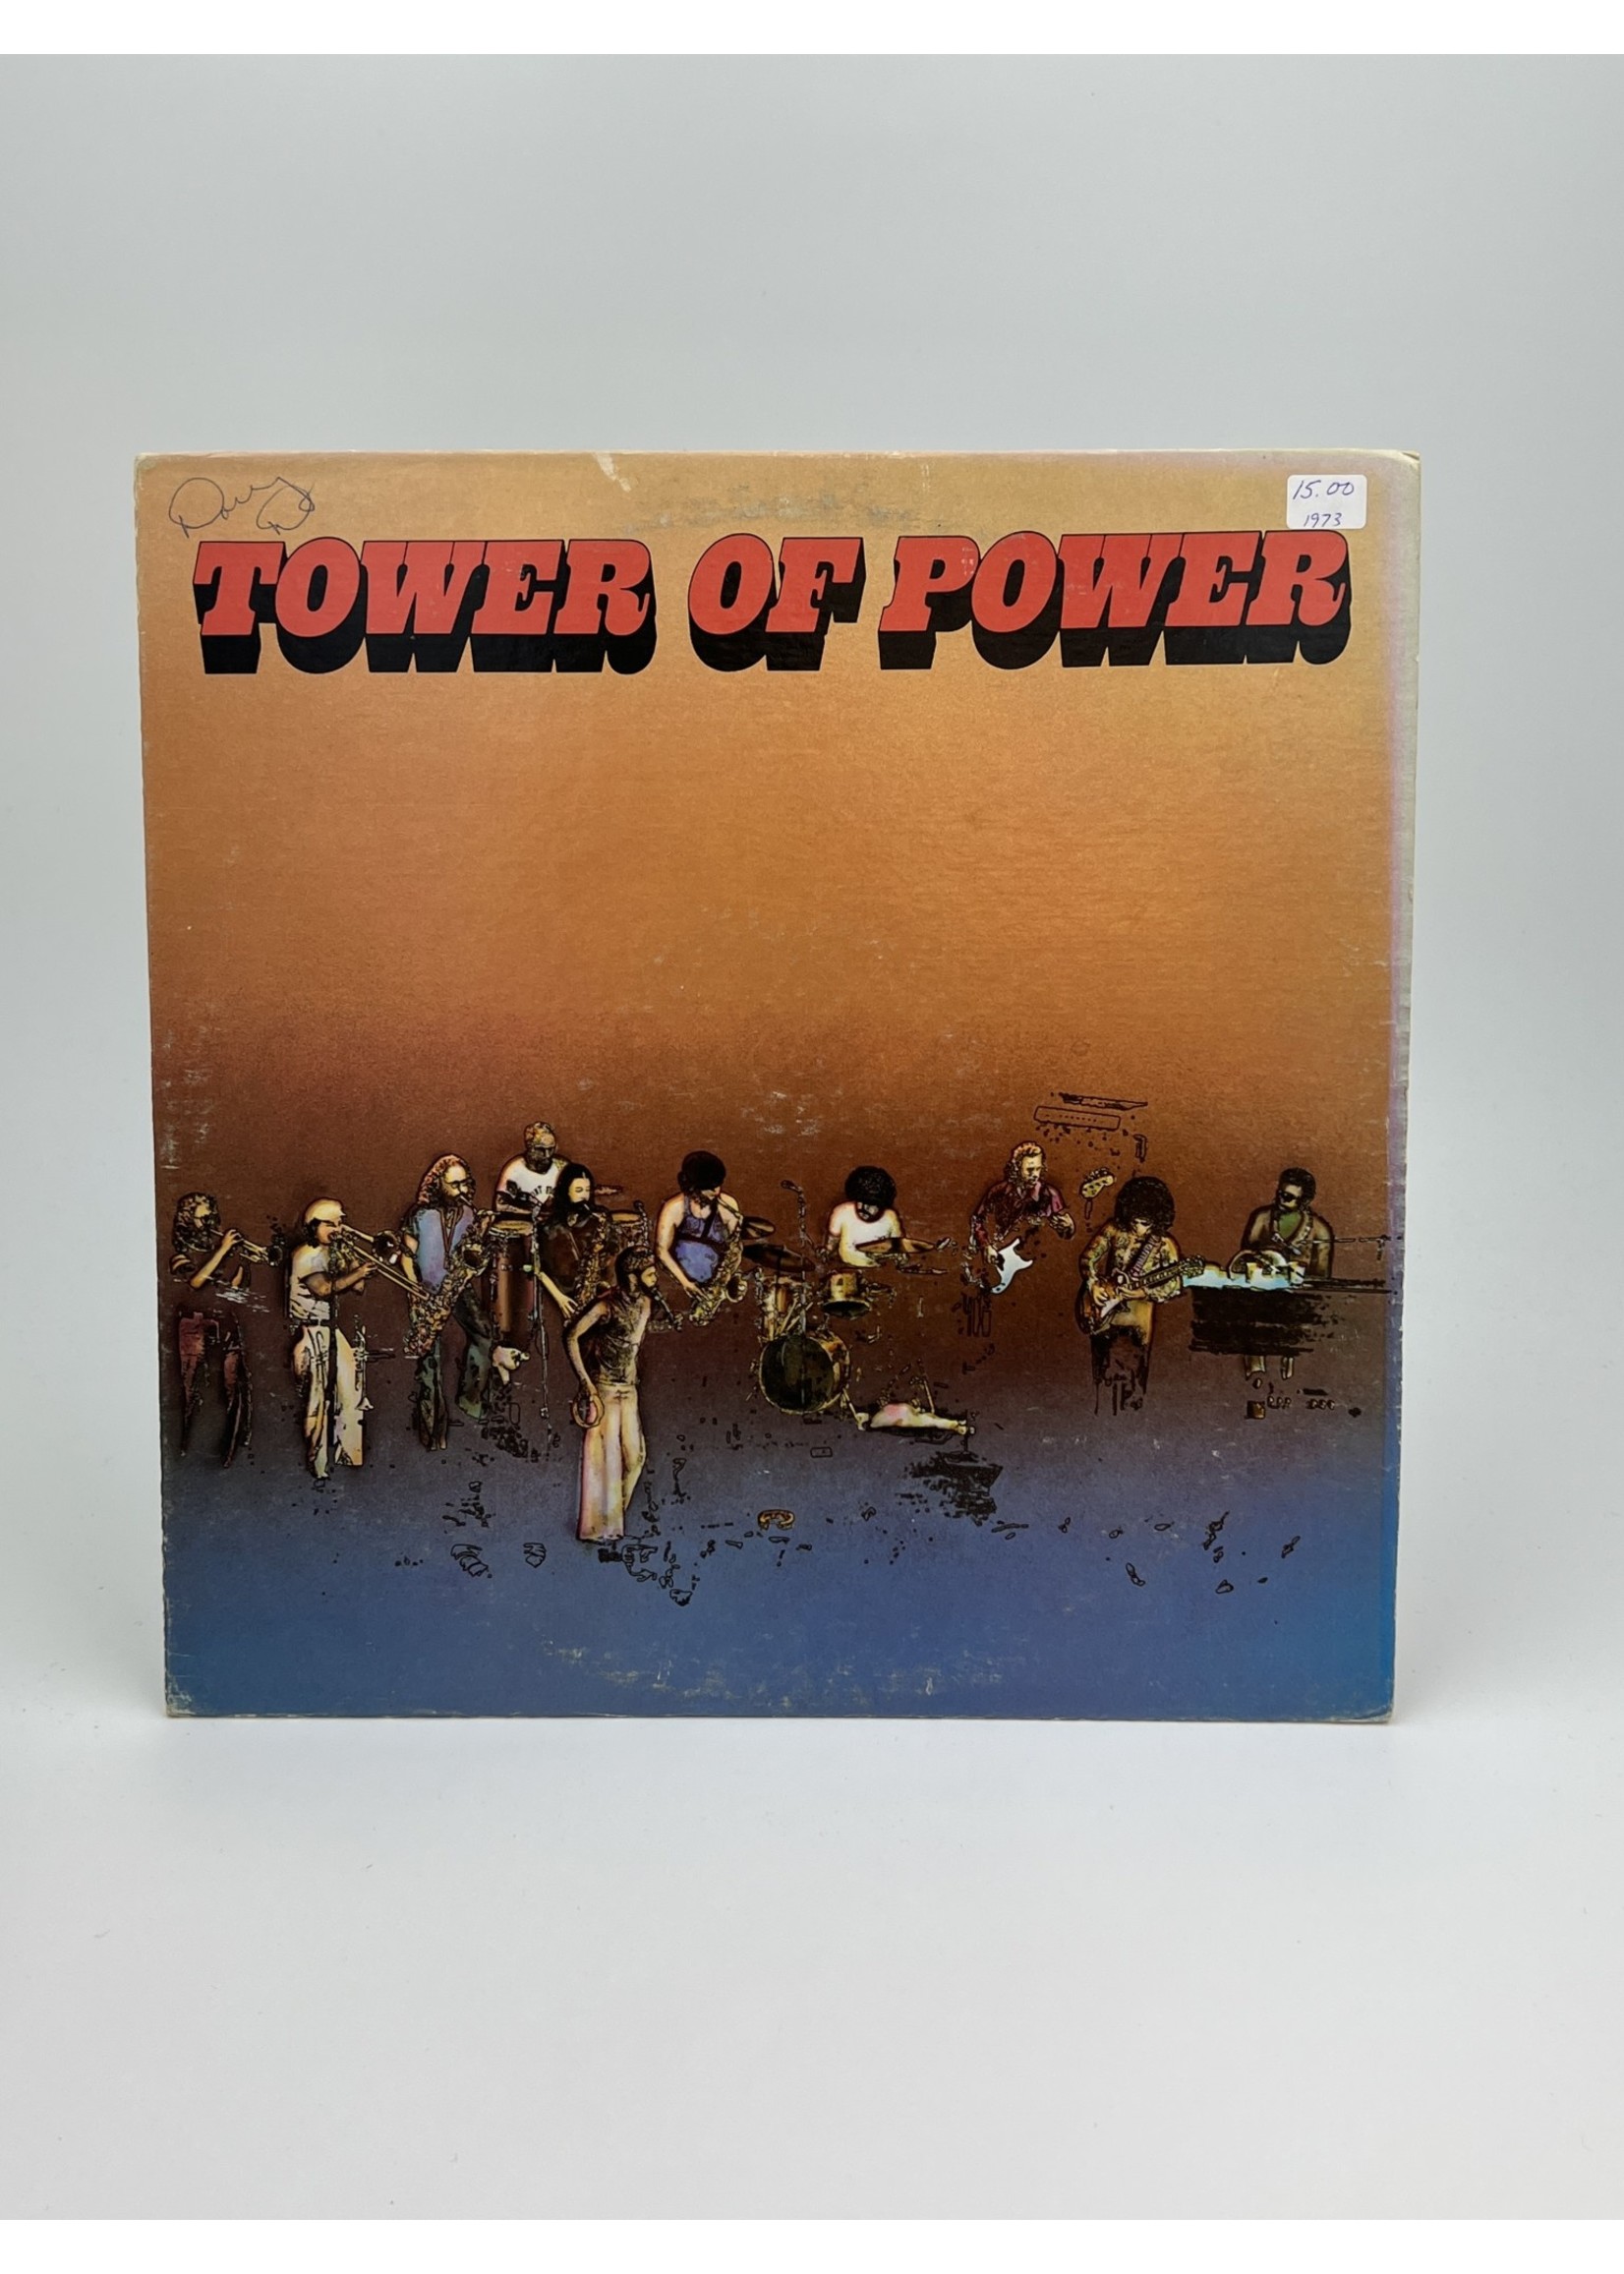 LP Tower of Power LP Record